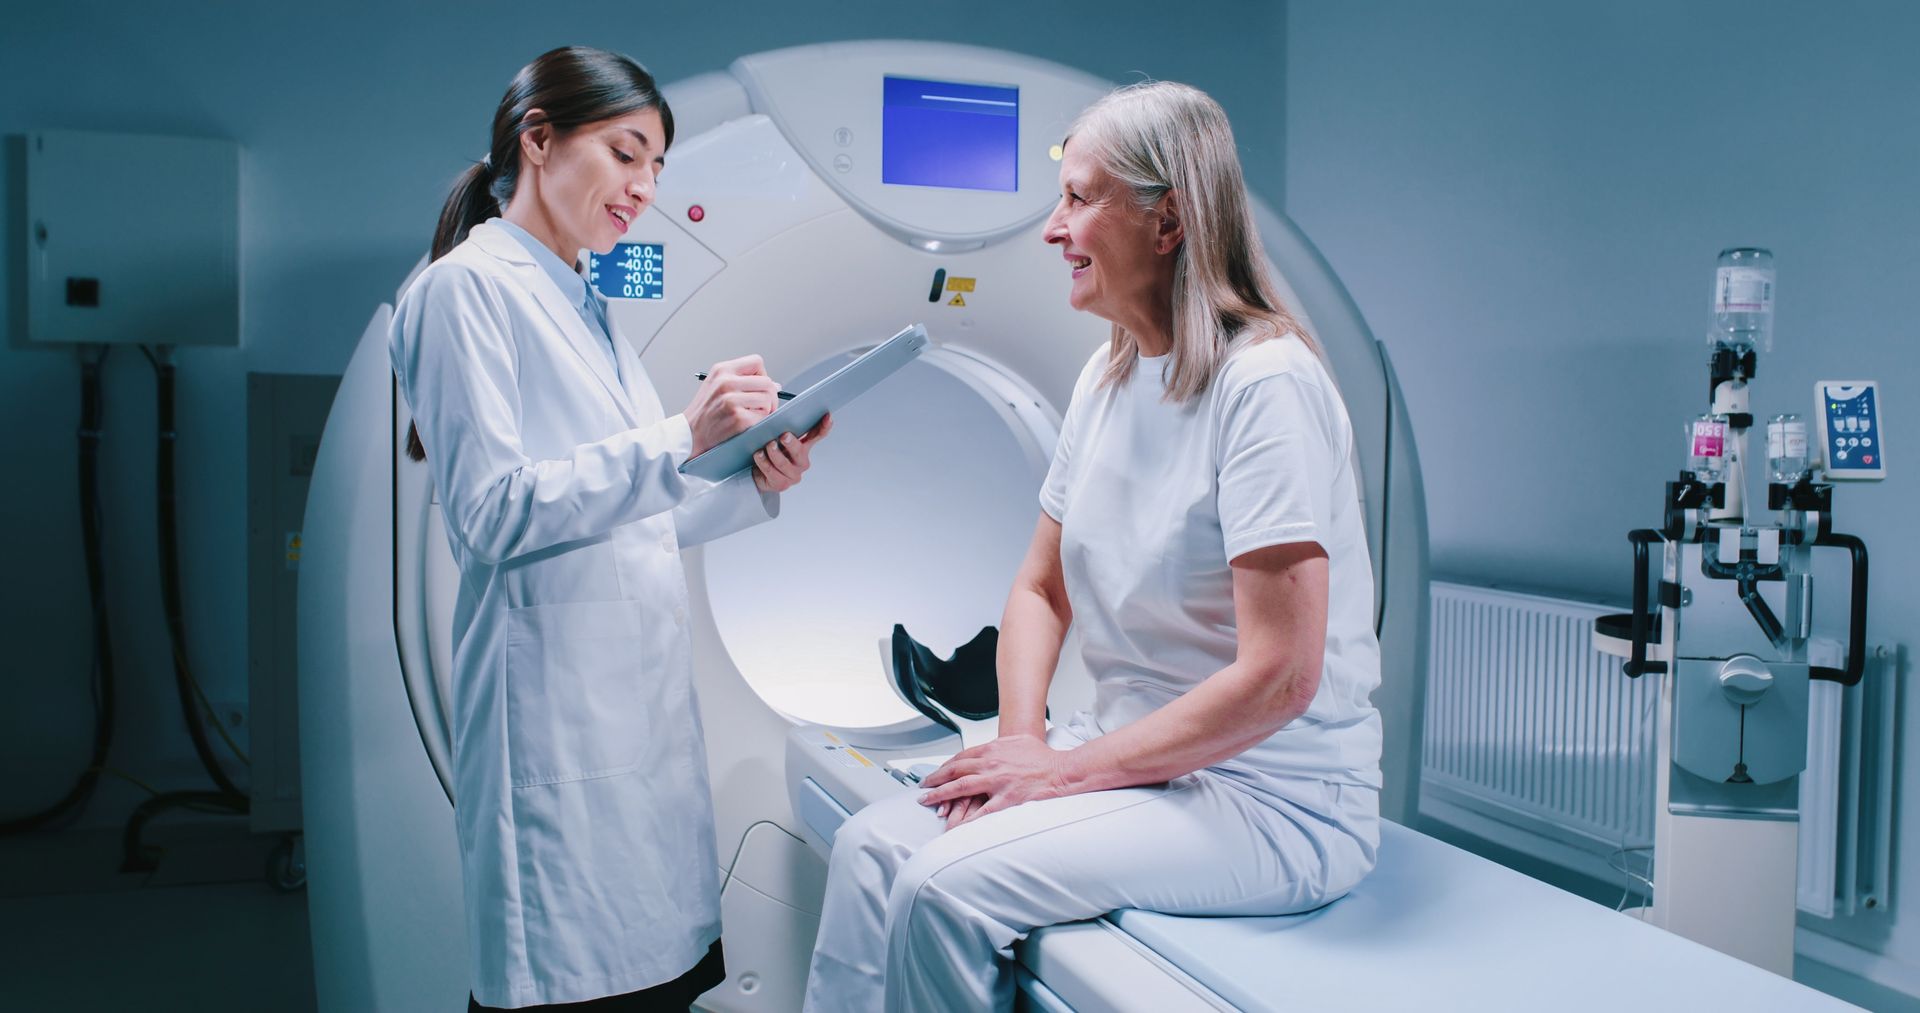 A doctor is talking to a patient sitting on a bed in front of a ct scan machine.